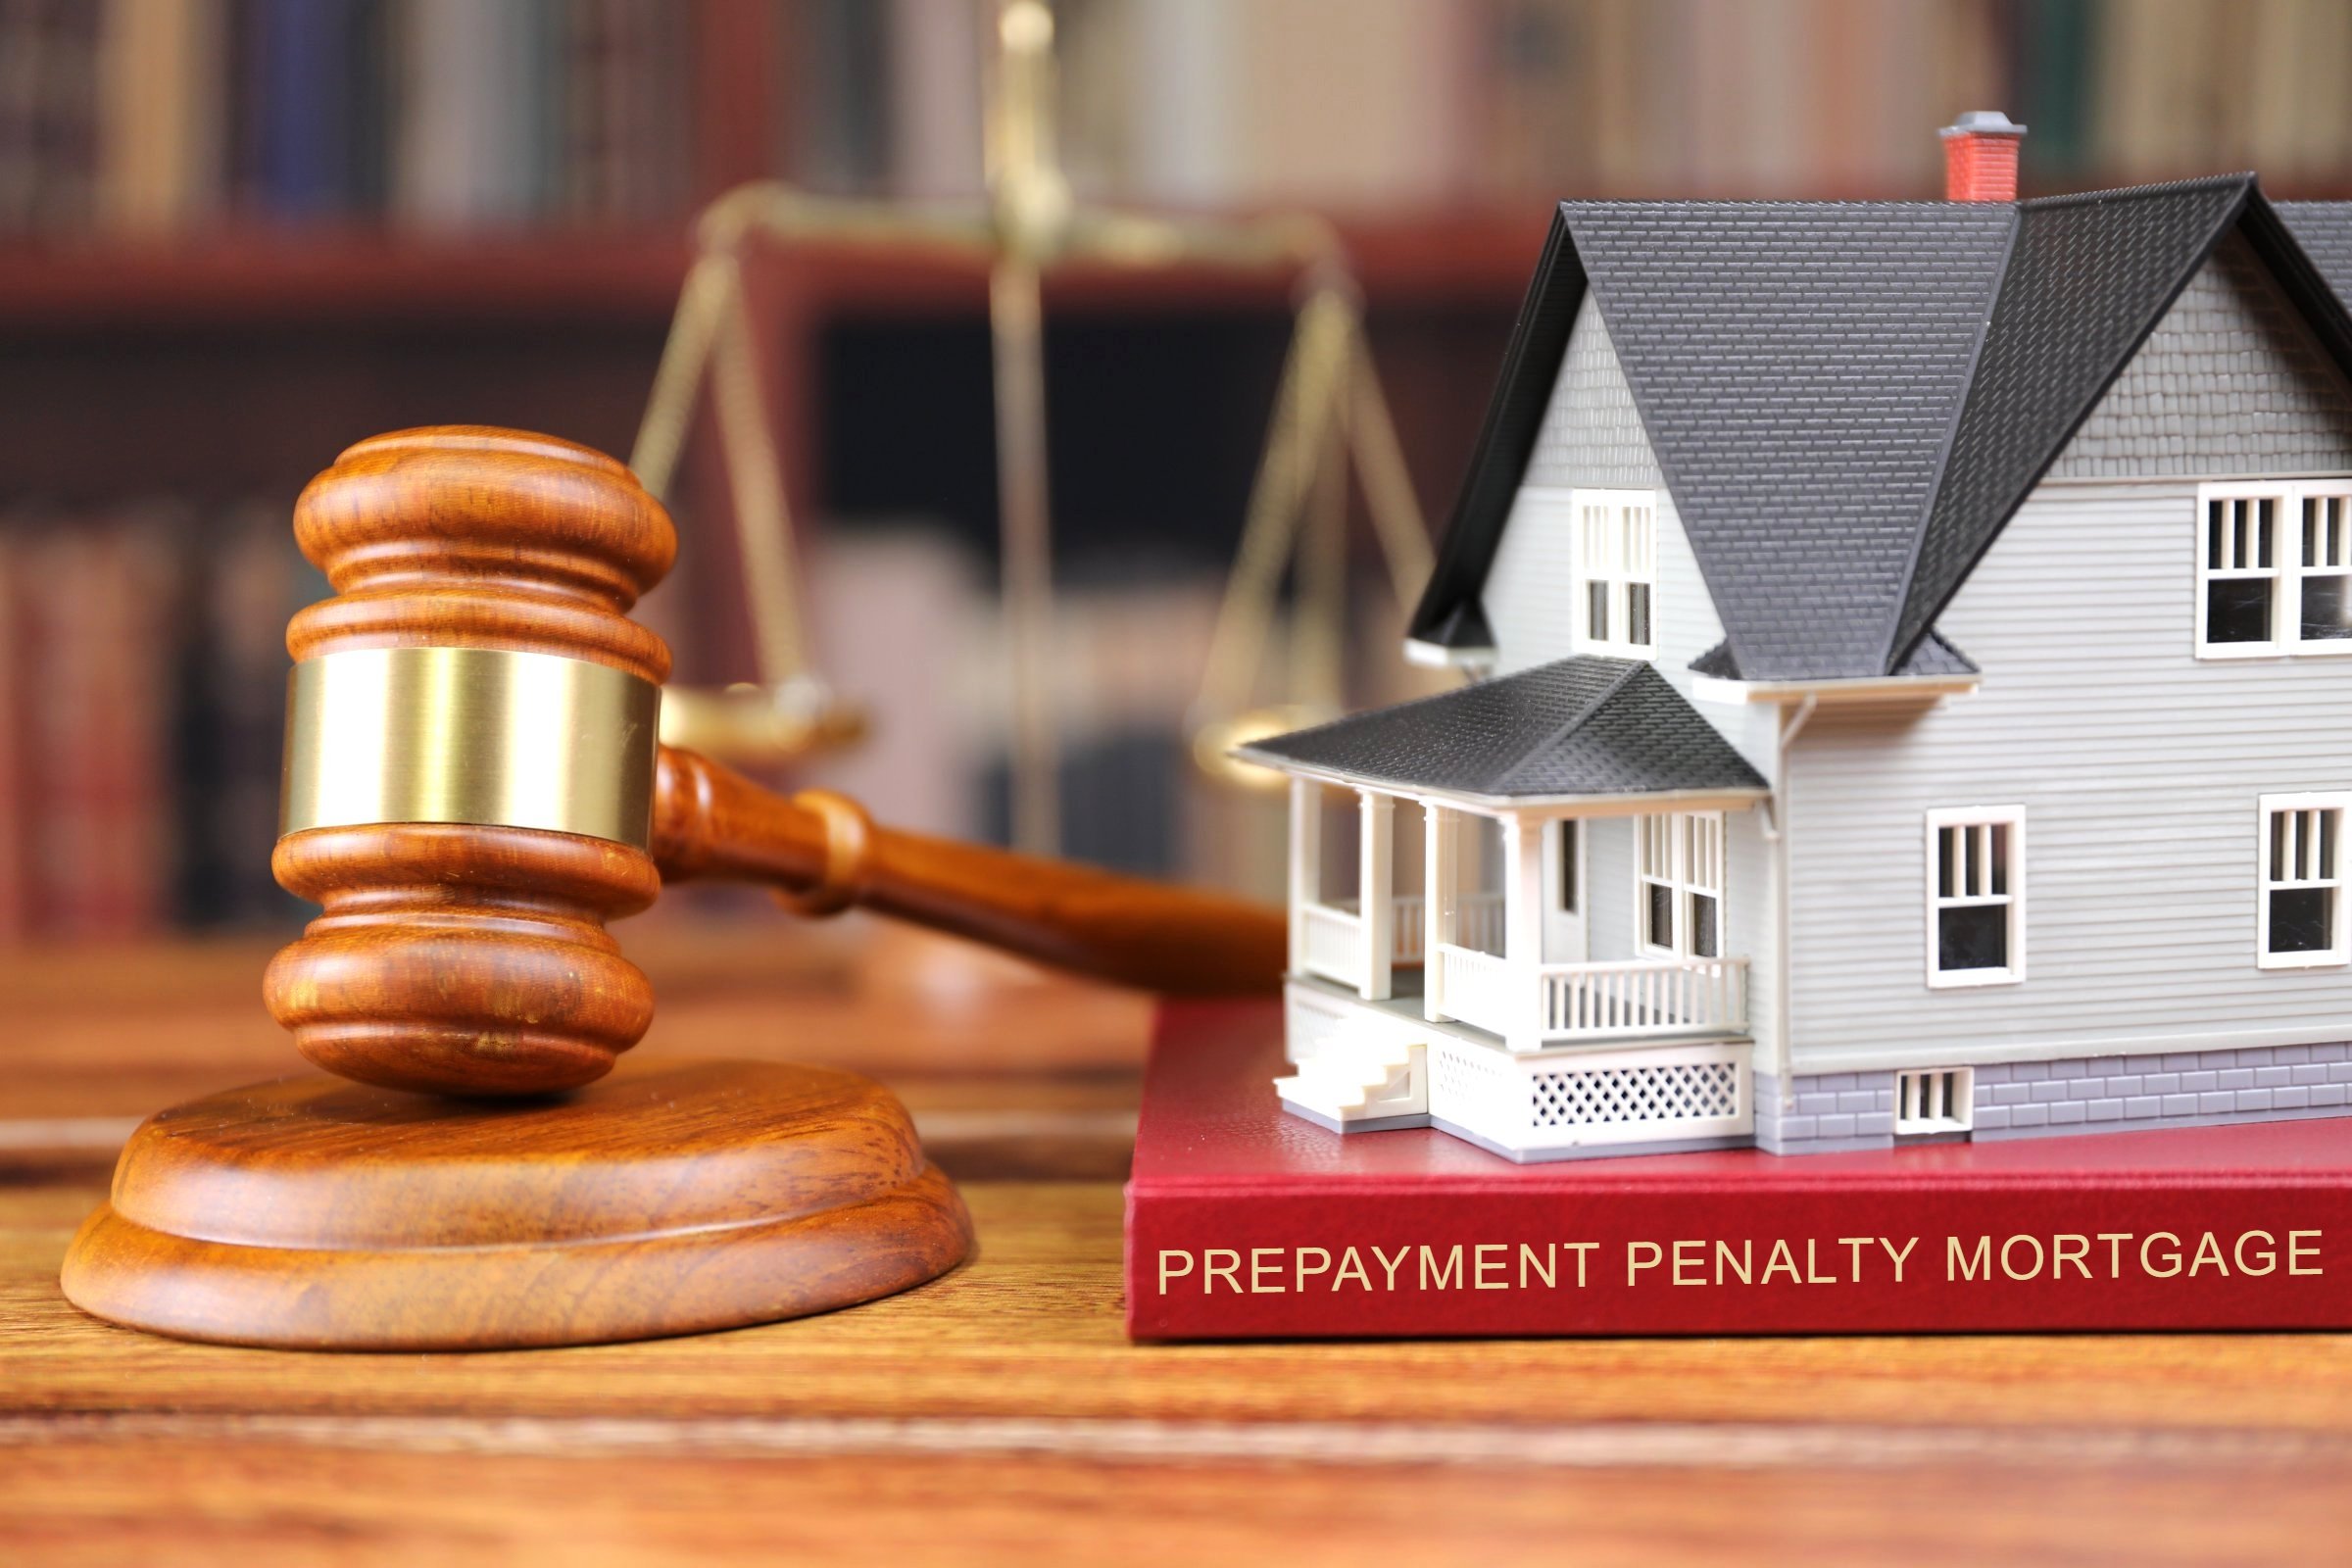 Prepayment Penalty Mortgage